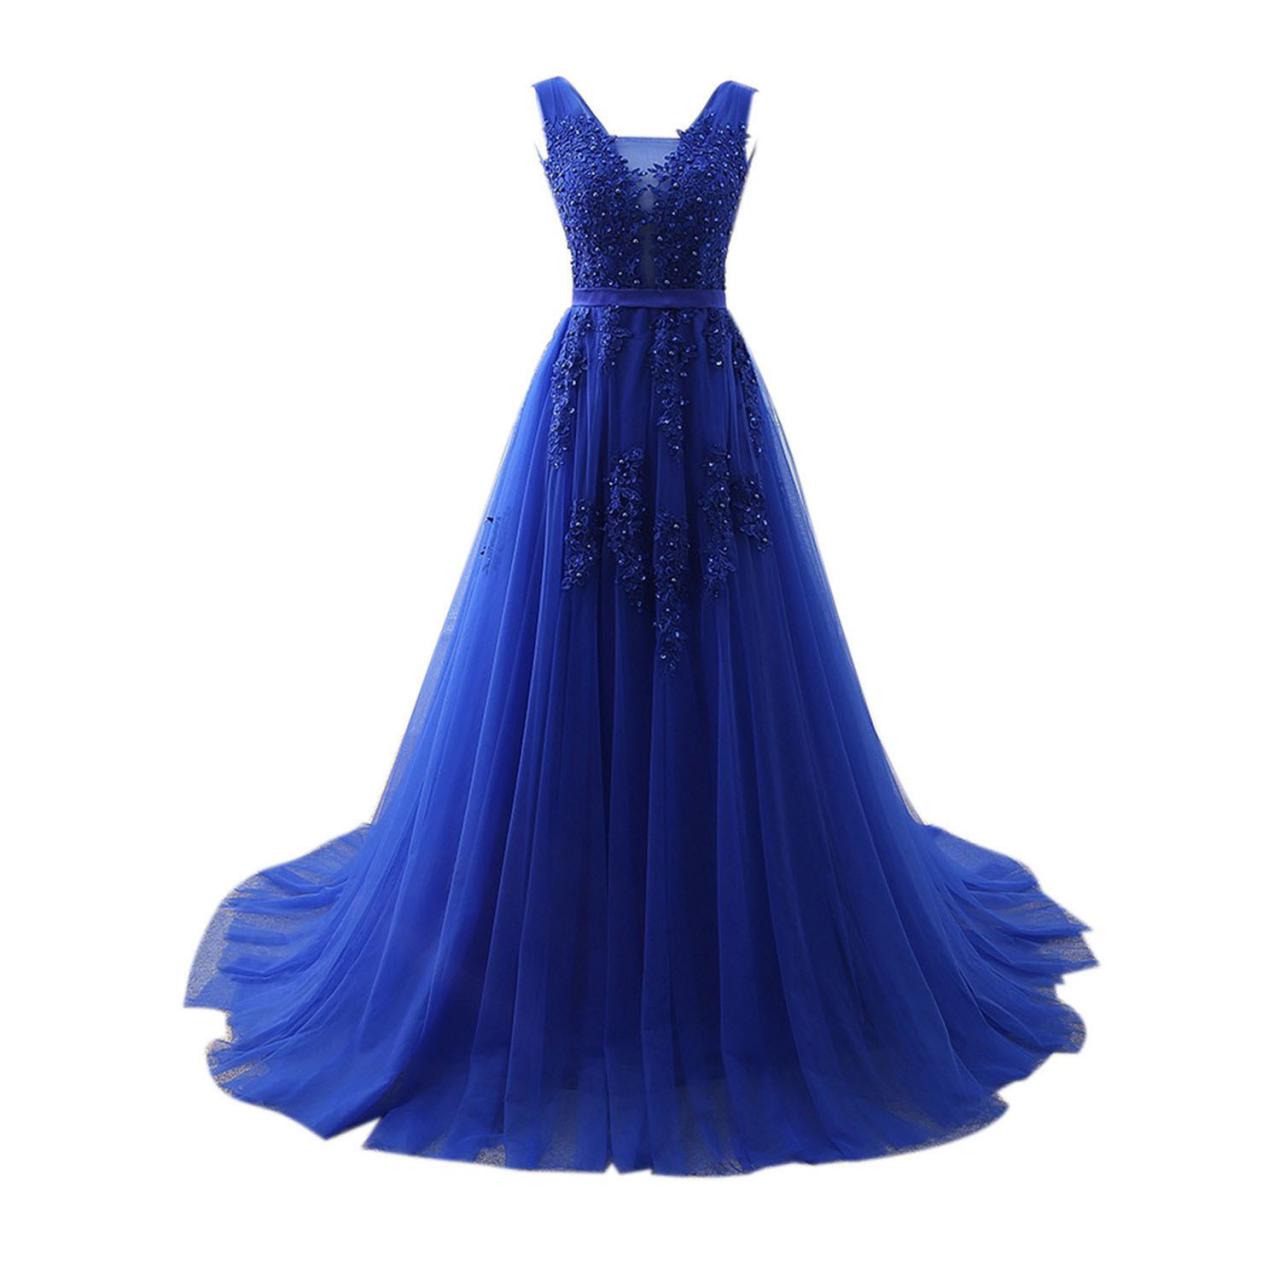 V Neck Royal Blue Long Pageant Dress Evening Gown With Beads Decor